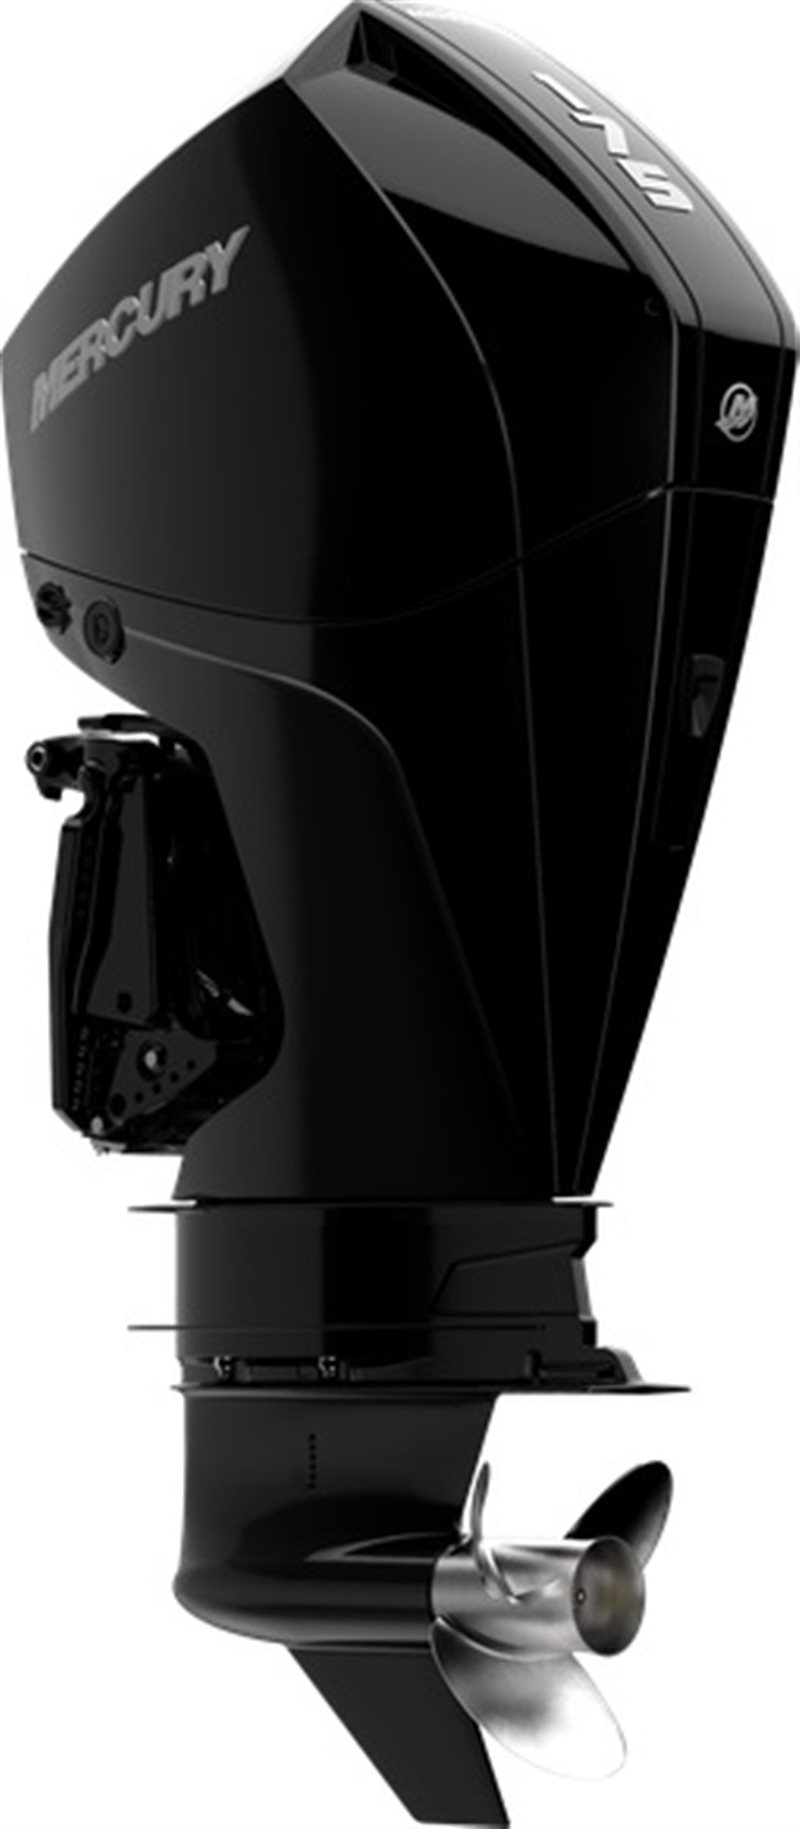 2021 Mercury Outboard Fourstroke 175 - 300 300 HP at DT Powersports & Marine